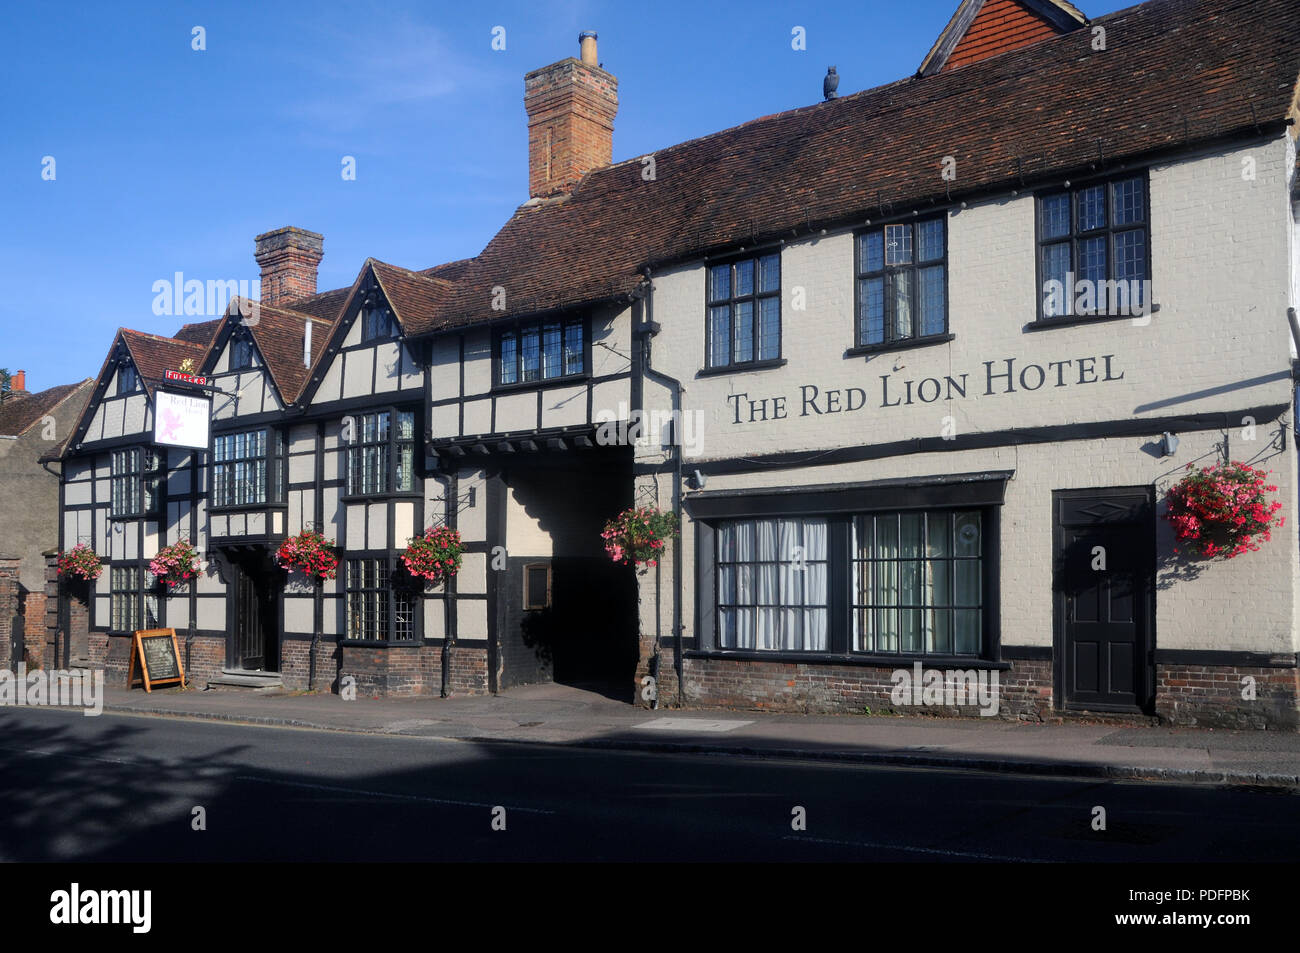 The Red Lion Hotel, in Wendover, Buckinghamshire, England Stock Photo